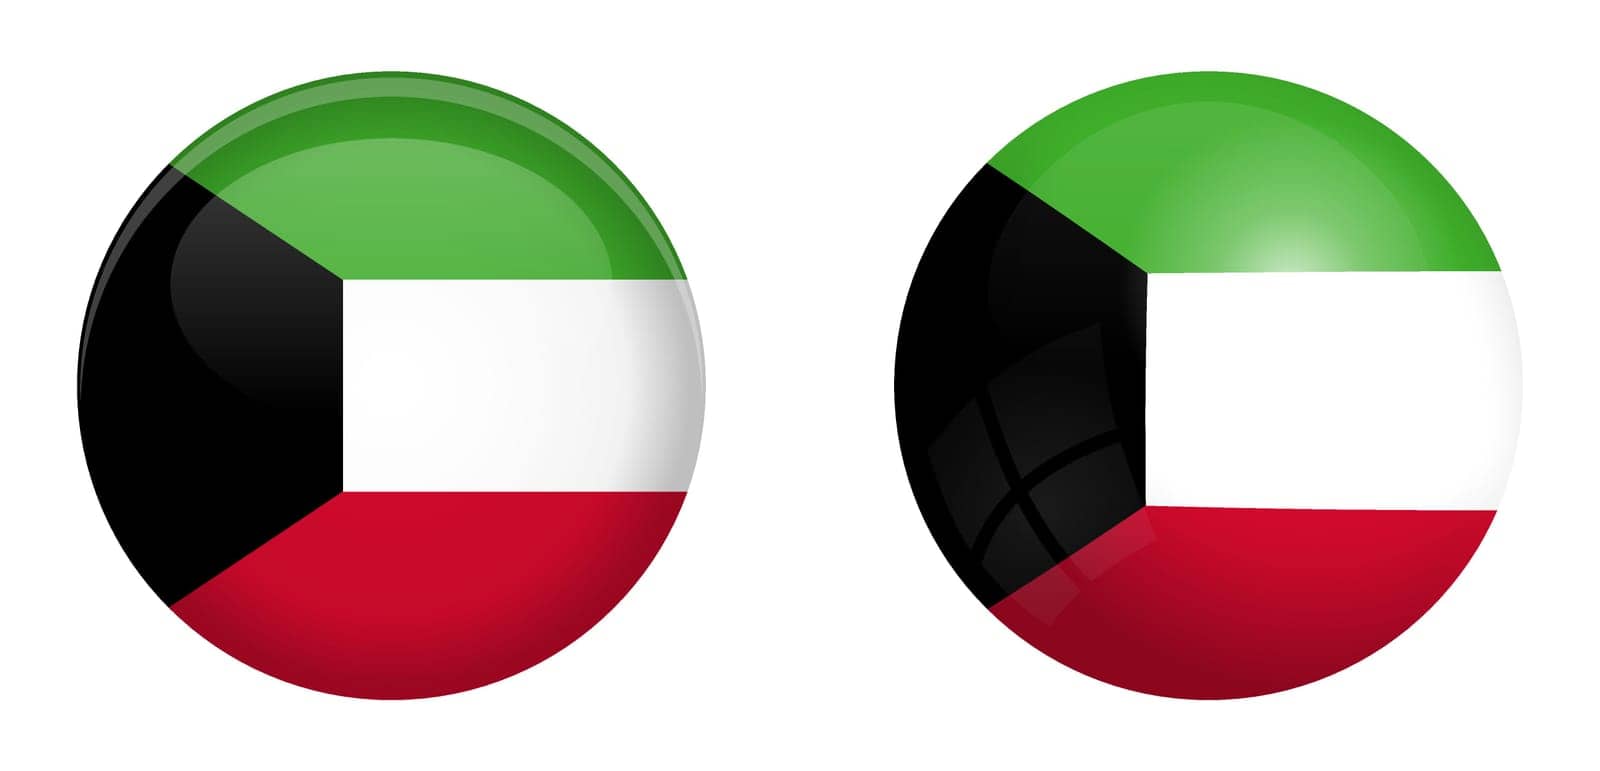 Kuwaiti flag under 3d dome button and on glossy sphere / ball.